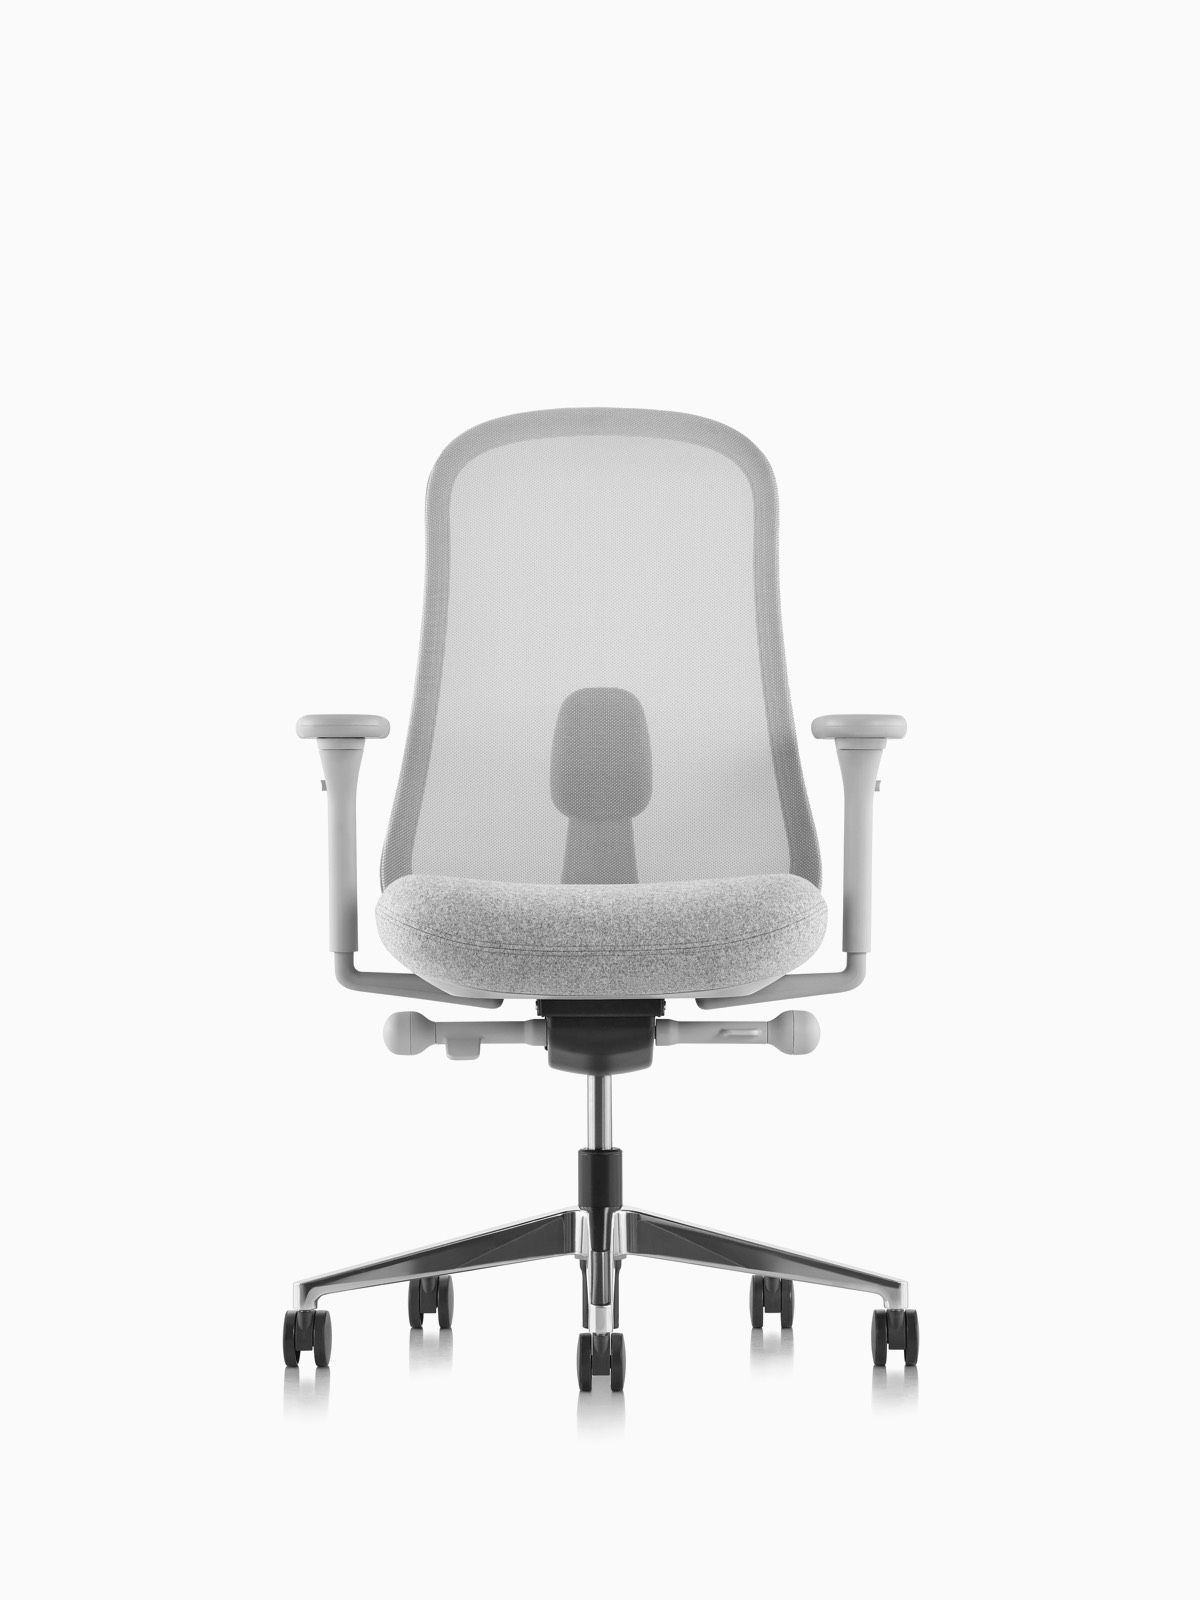 https://www.hermanmiller.com/content/dam/hmicom/page_assets/products/lino_chairs/th_prd_lino_chair_office_chairs_fn.jpg